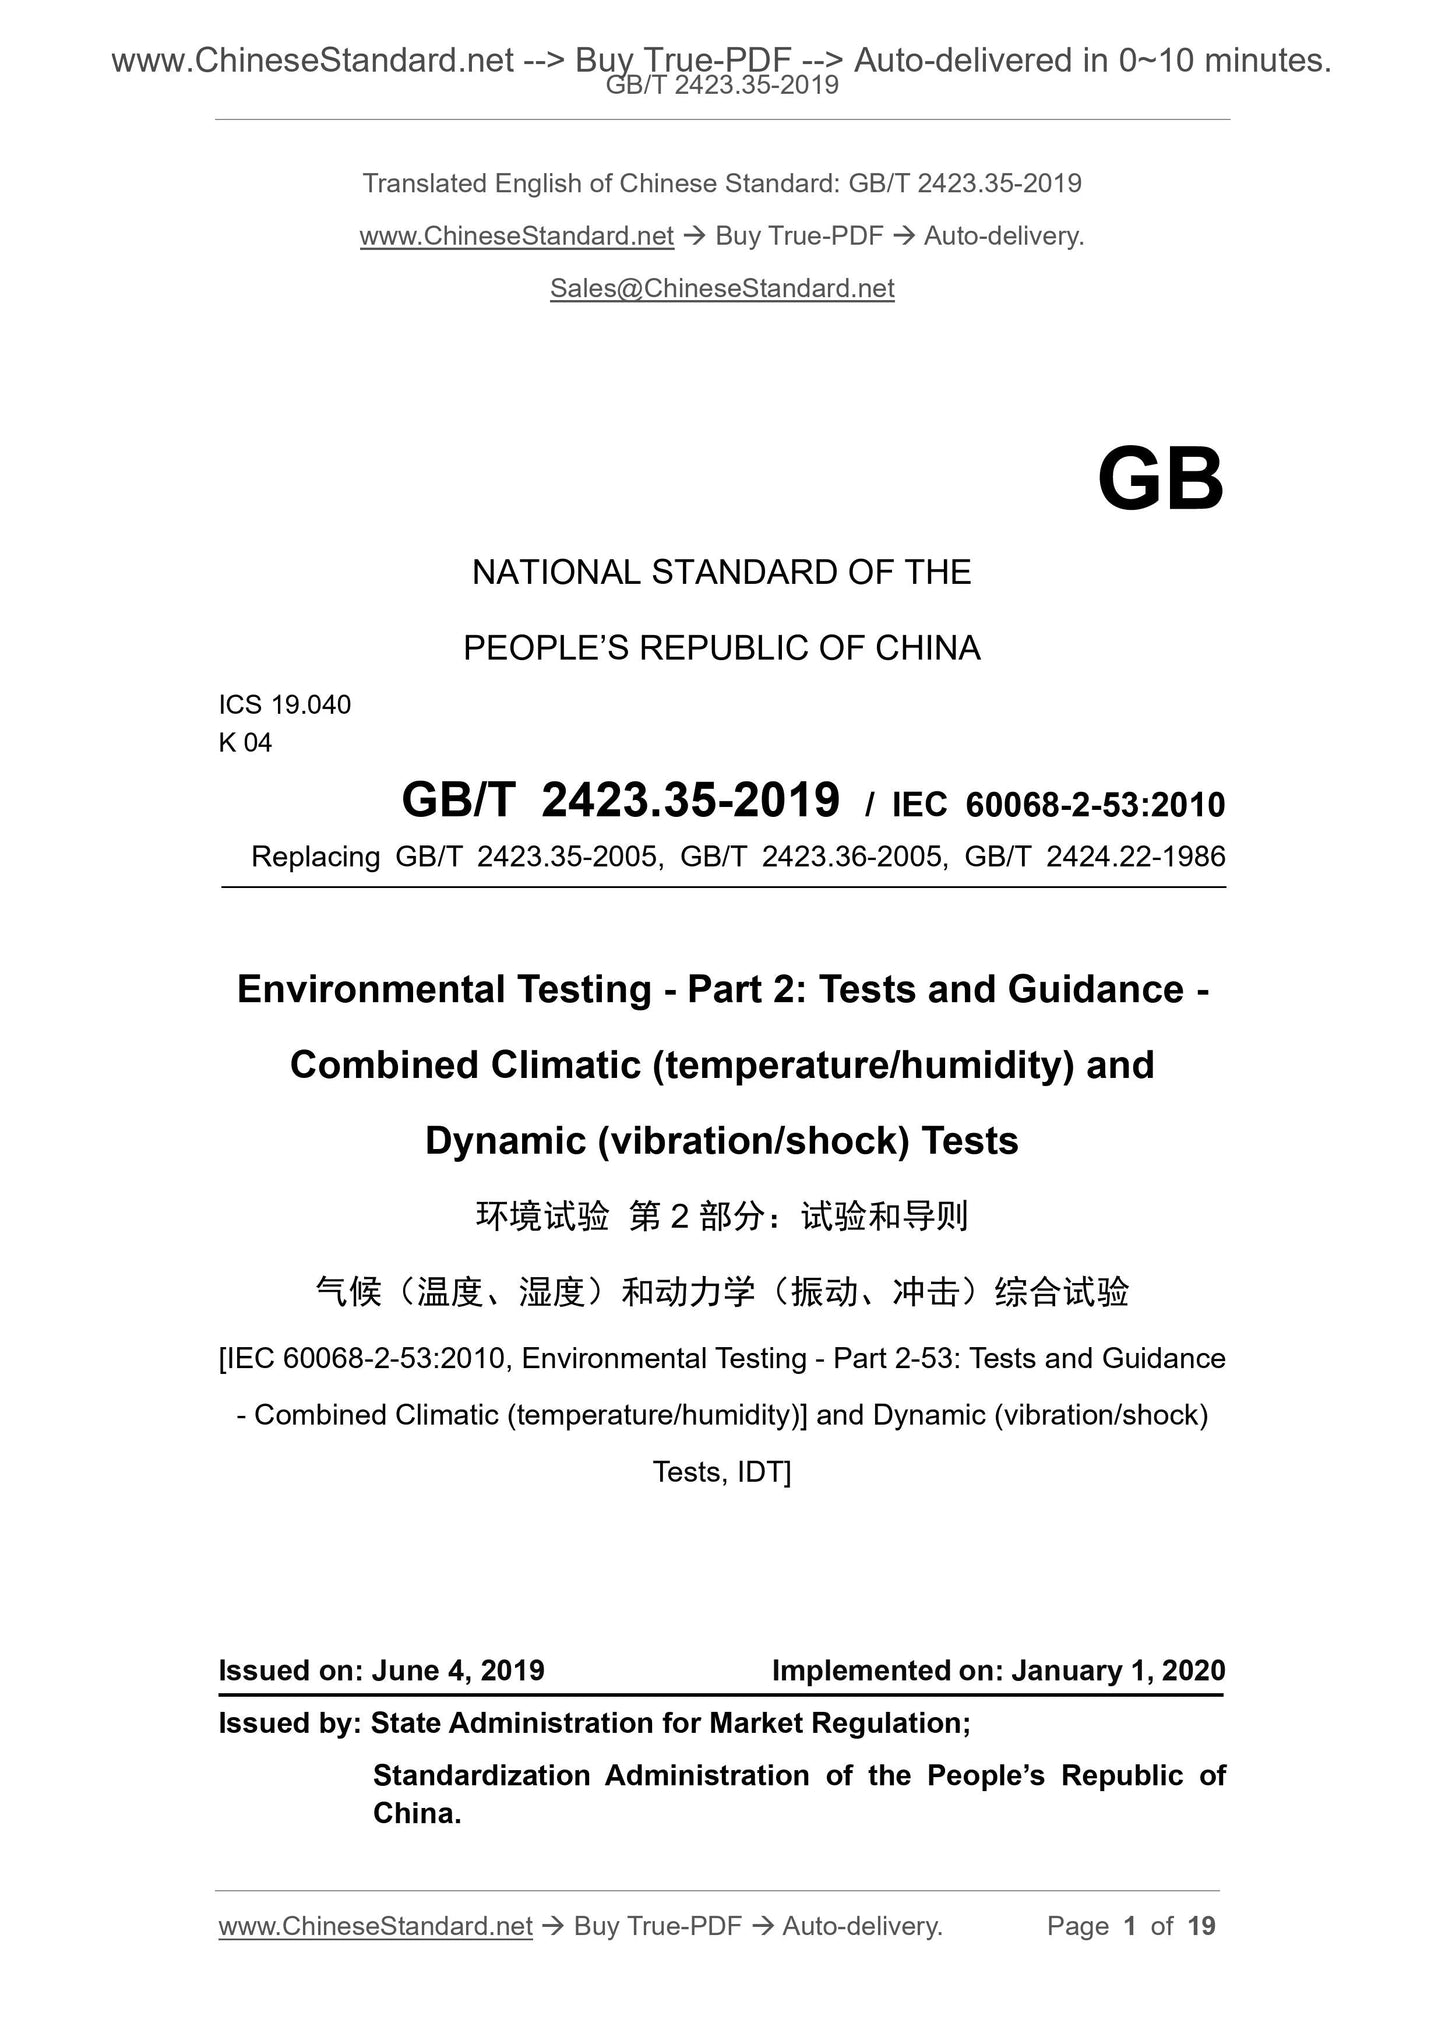 GB/T 2423.35-2019 Page 1